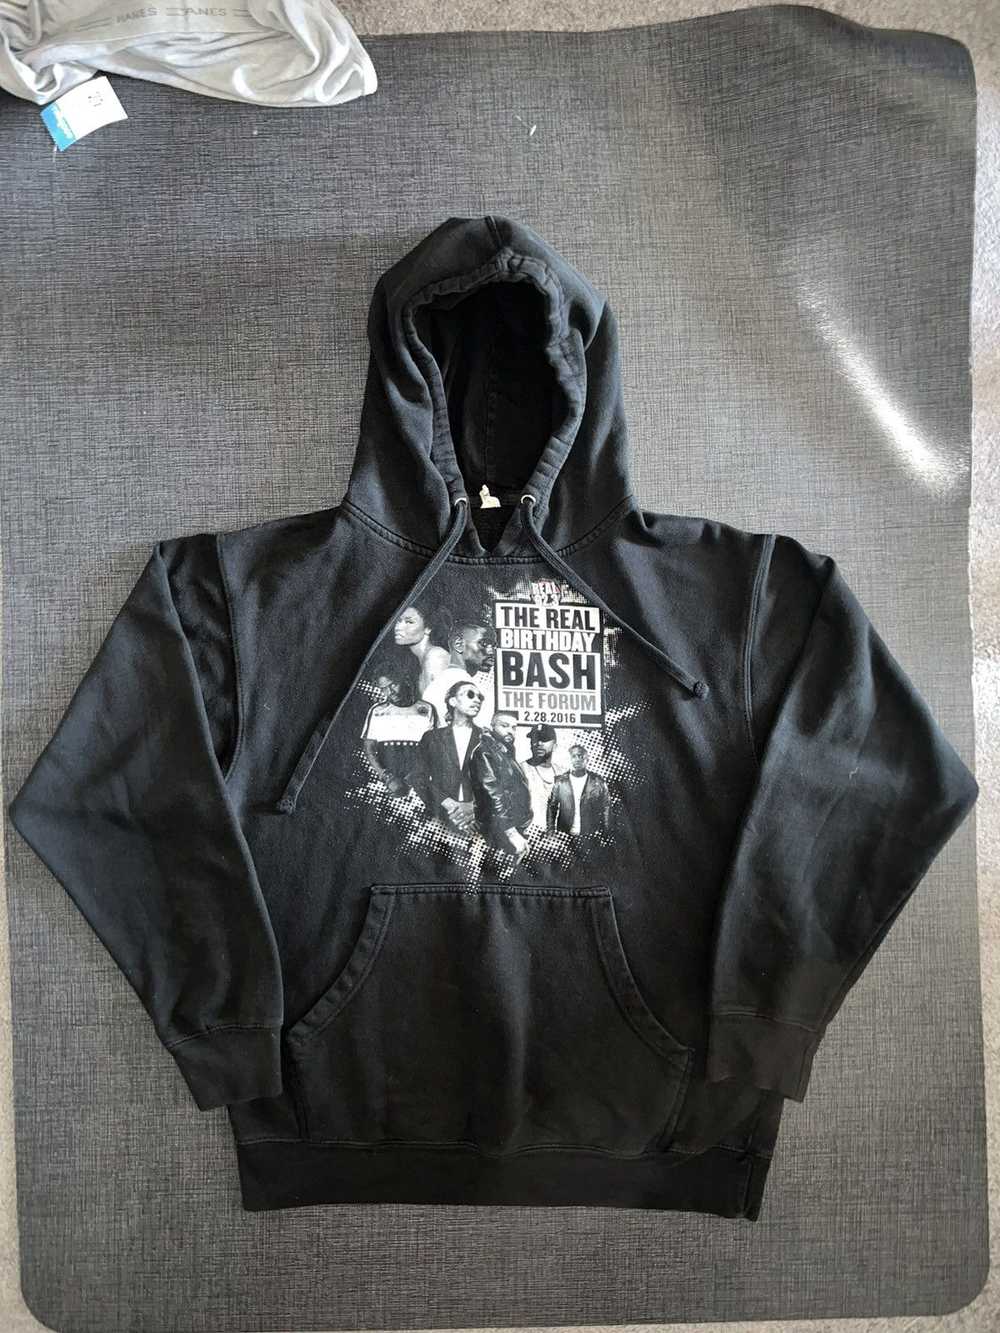 Other Rap Tour Hoodie 2016 - image 2